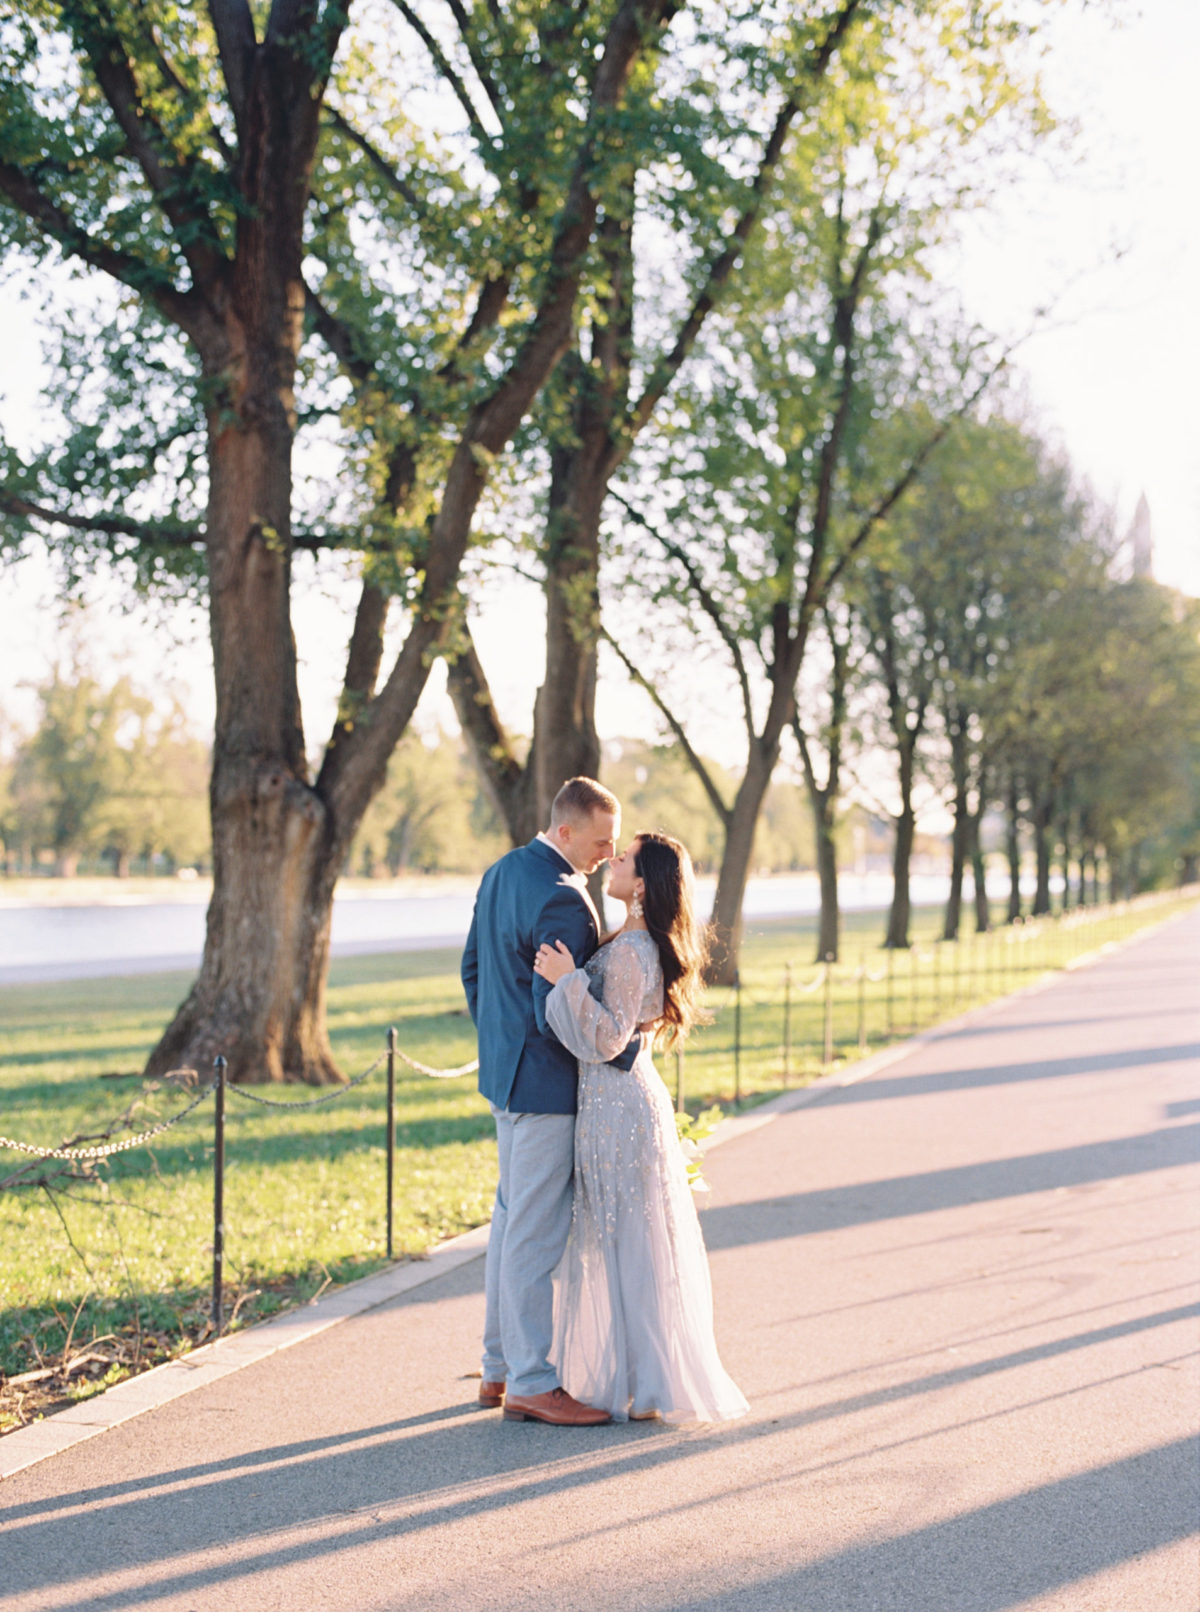 Sunrise engagement session at the Lincoln Memorial